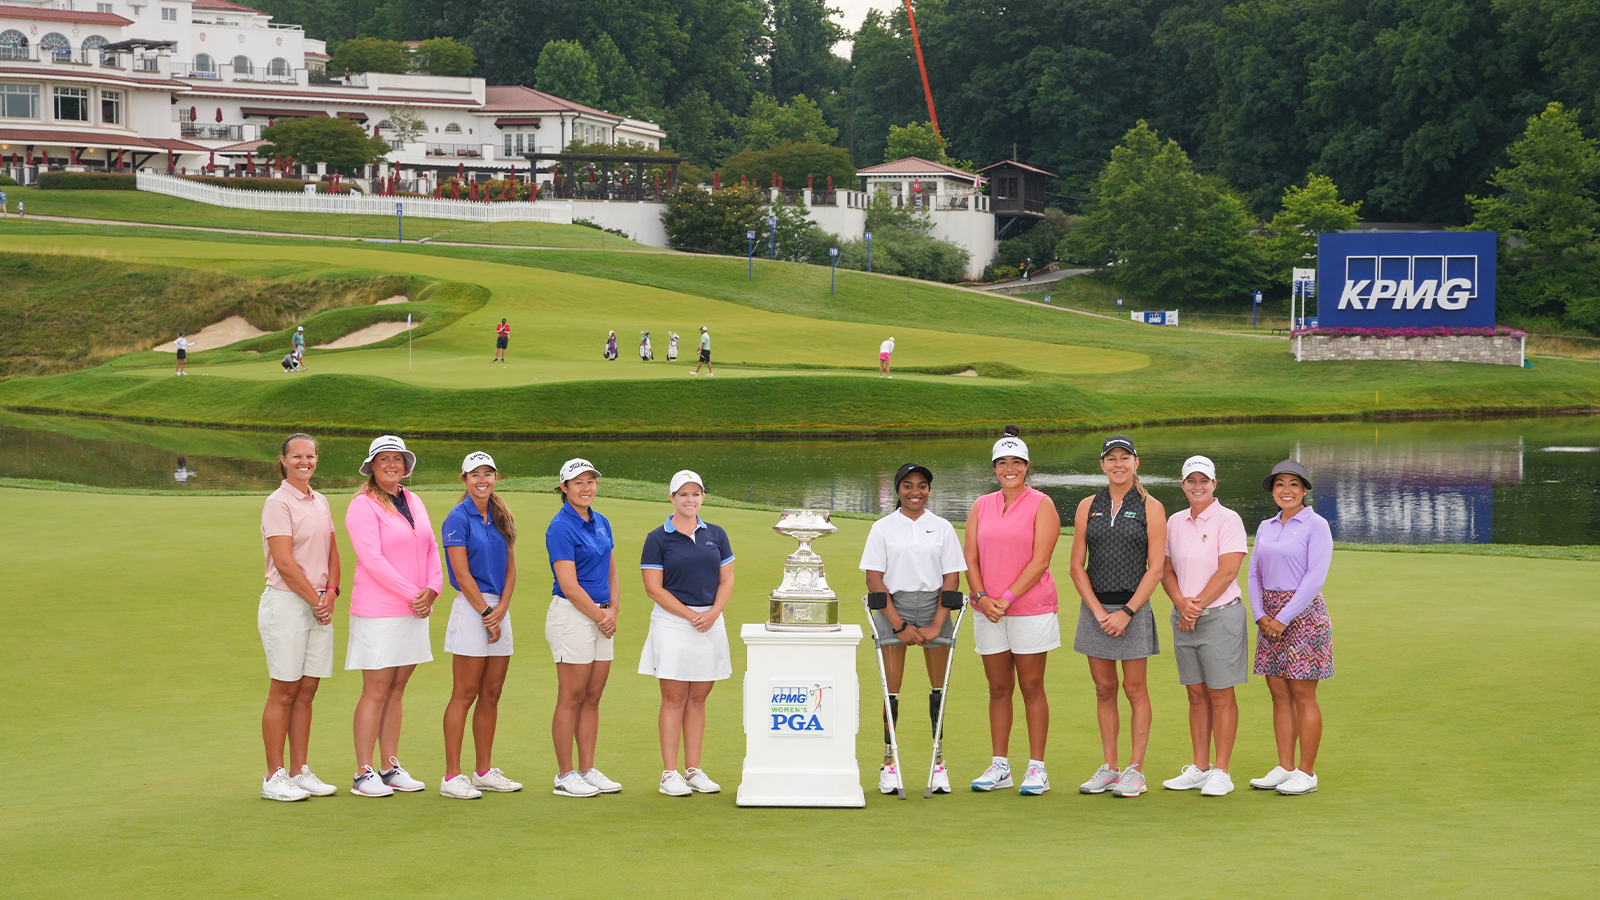  PGA and LPGA Professionals gather for a photo around the KPMG trophy and Taz Wilson during a practice round for the 2022 KPMG Women's PGA Championship at Congressional Country Club on June 22, 2022 in Bethesda, Maryland. (Photo by Darren Carroll/PGA of America)